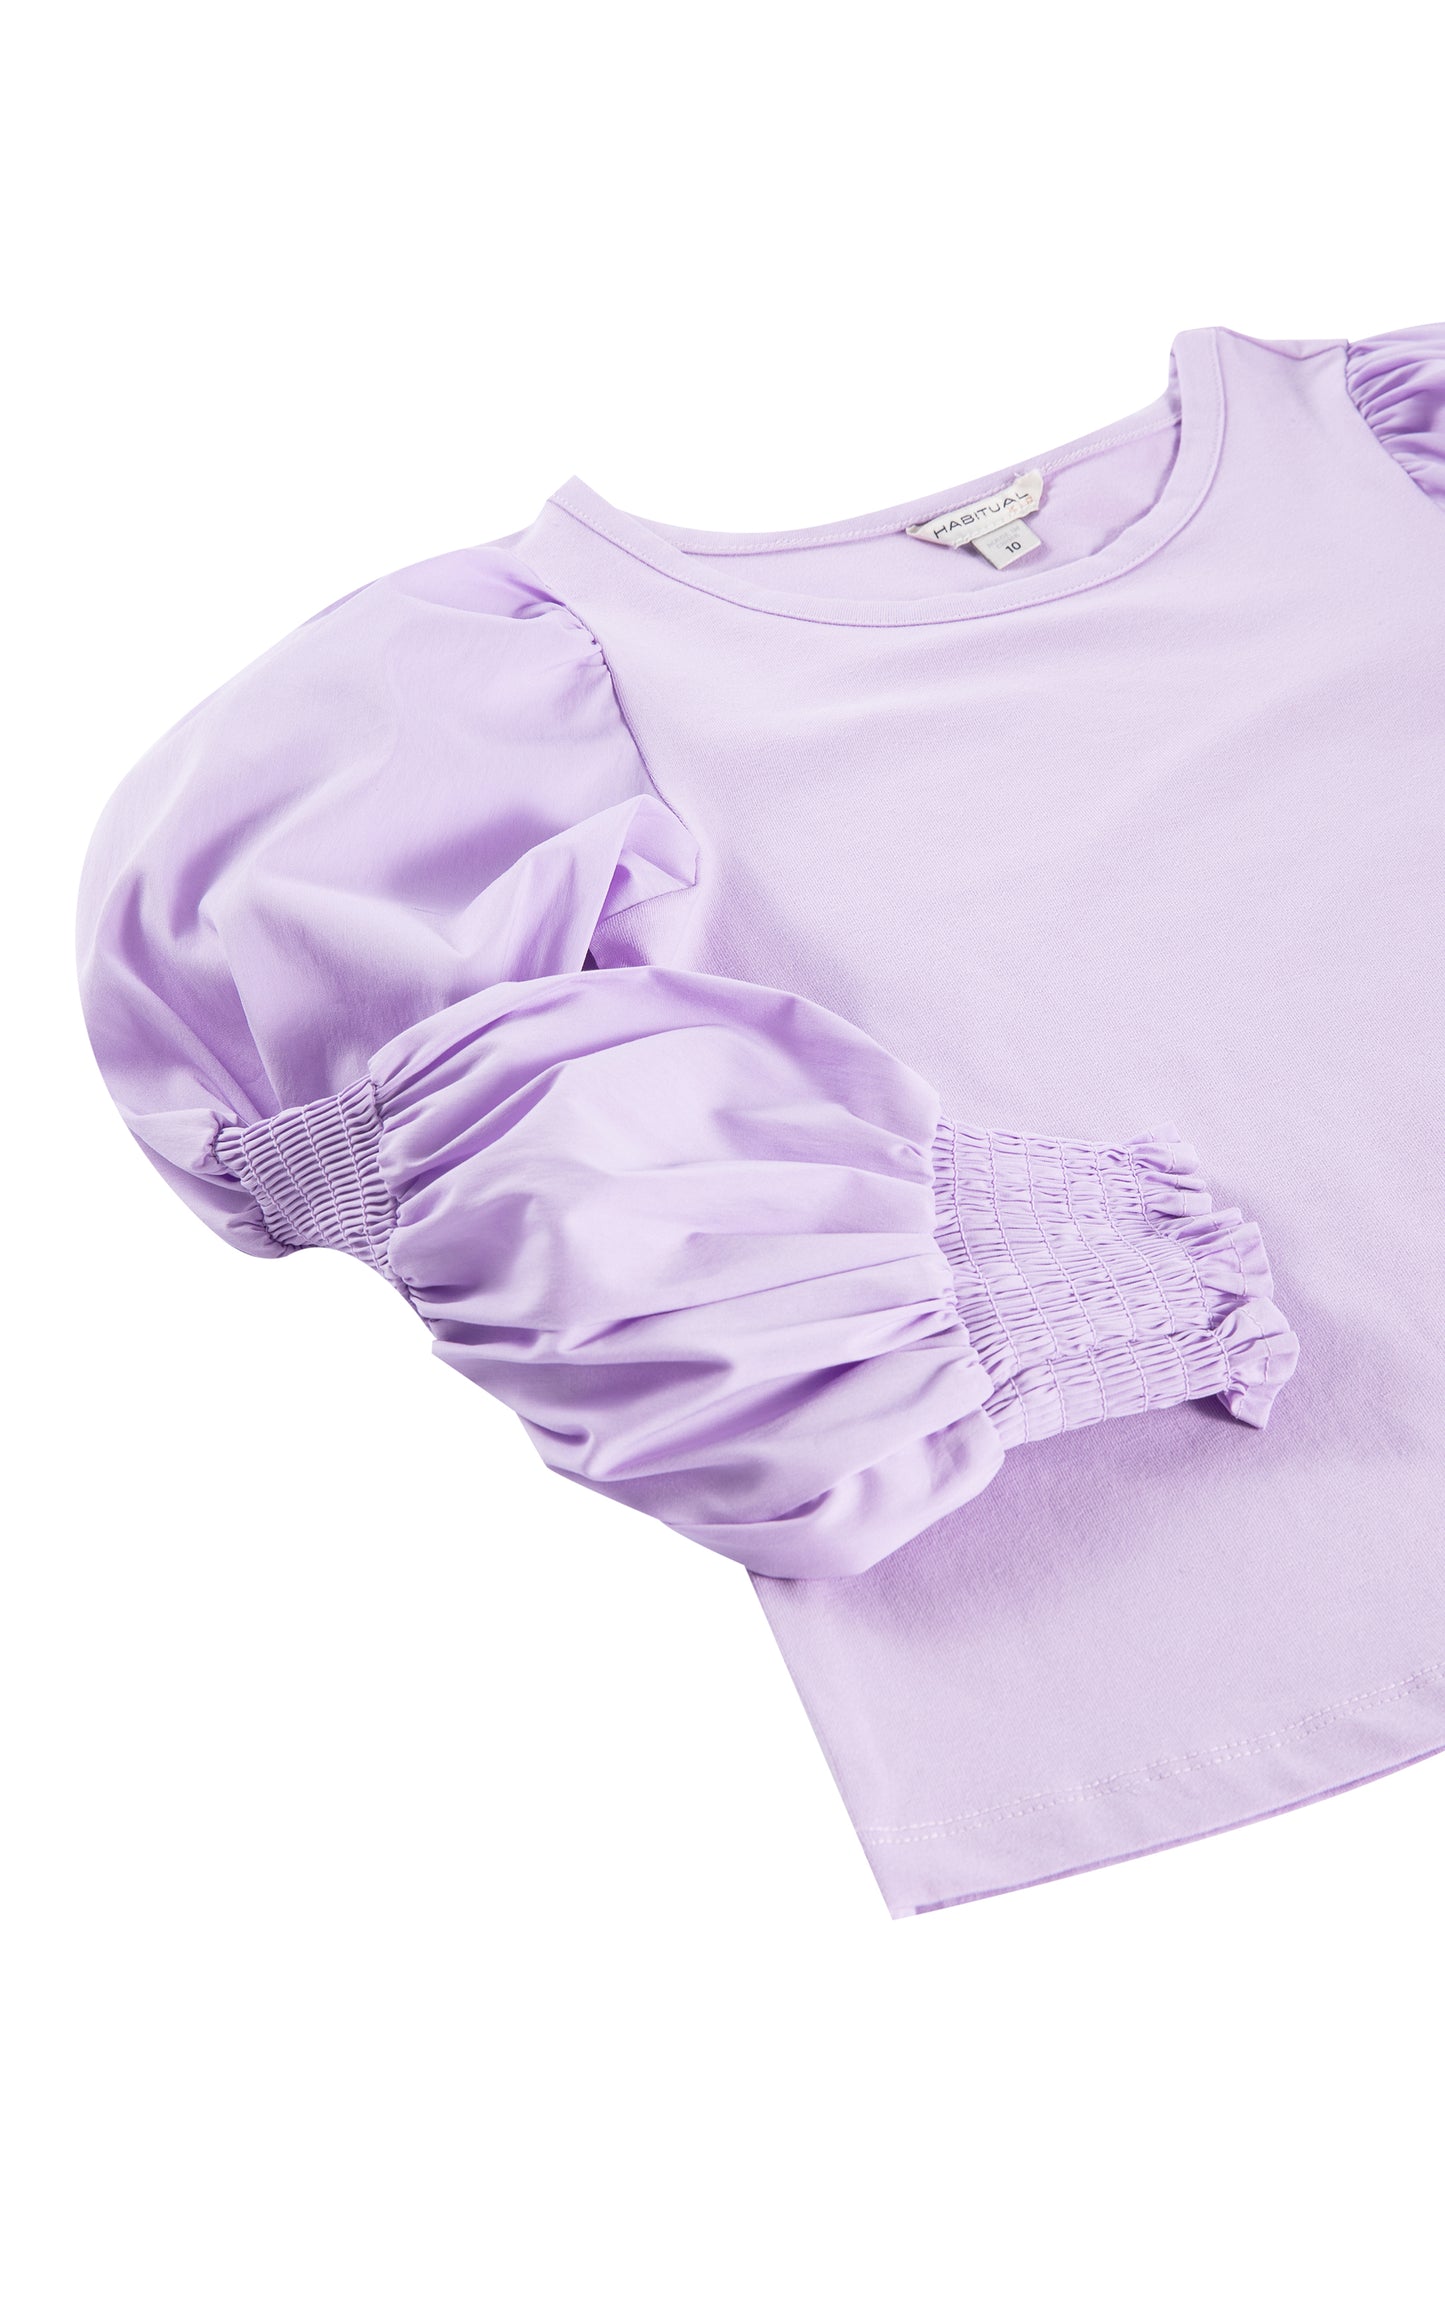 CLOSE UP OF LIGHT PURPLE LONG-SLEEVE TOP WITH SMOCKING ALONG THE SLEEVES